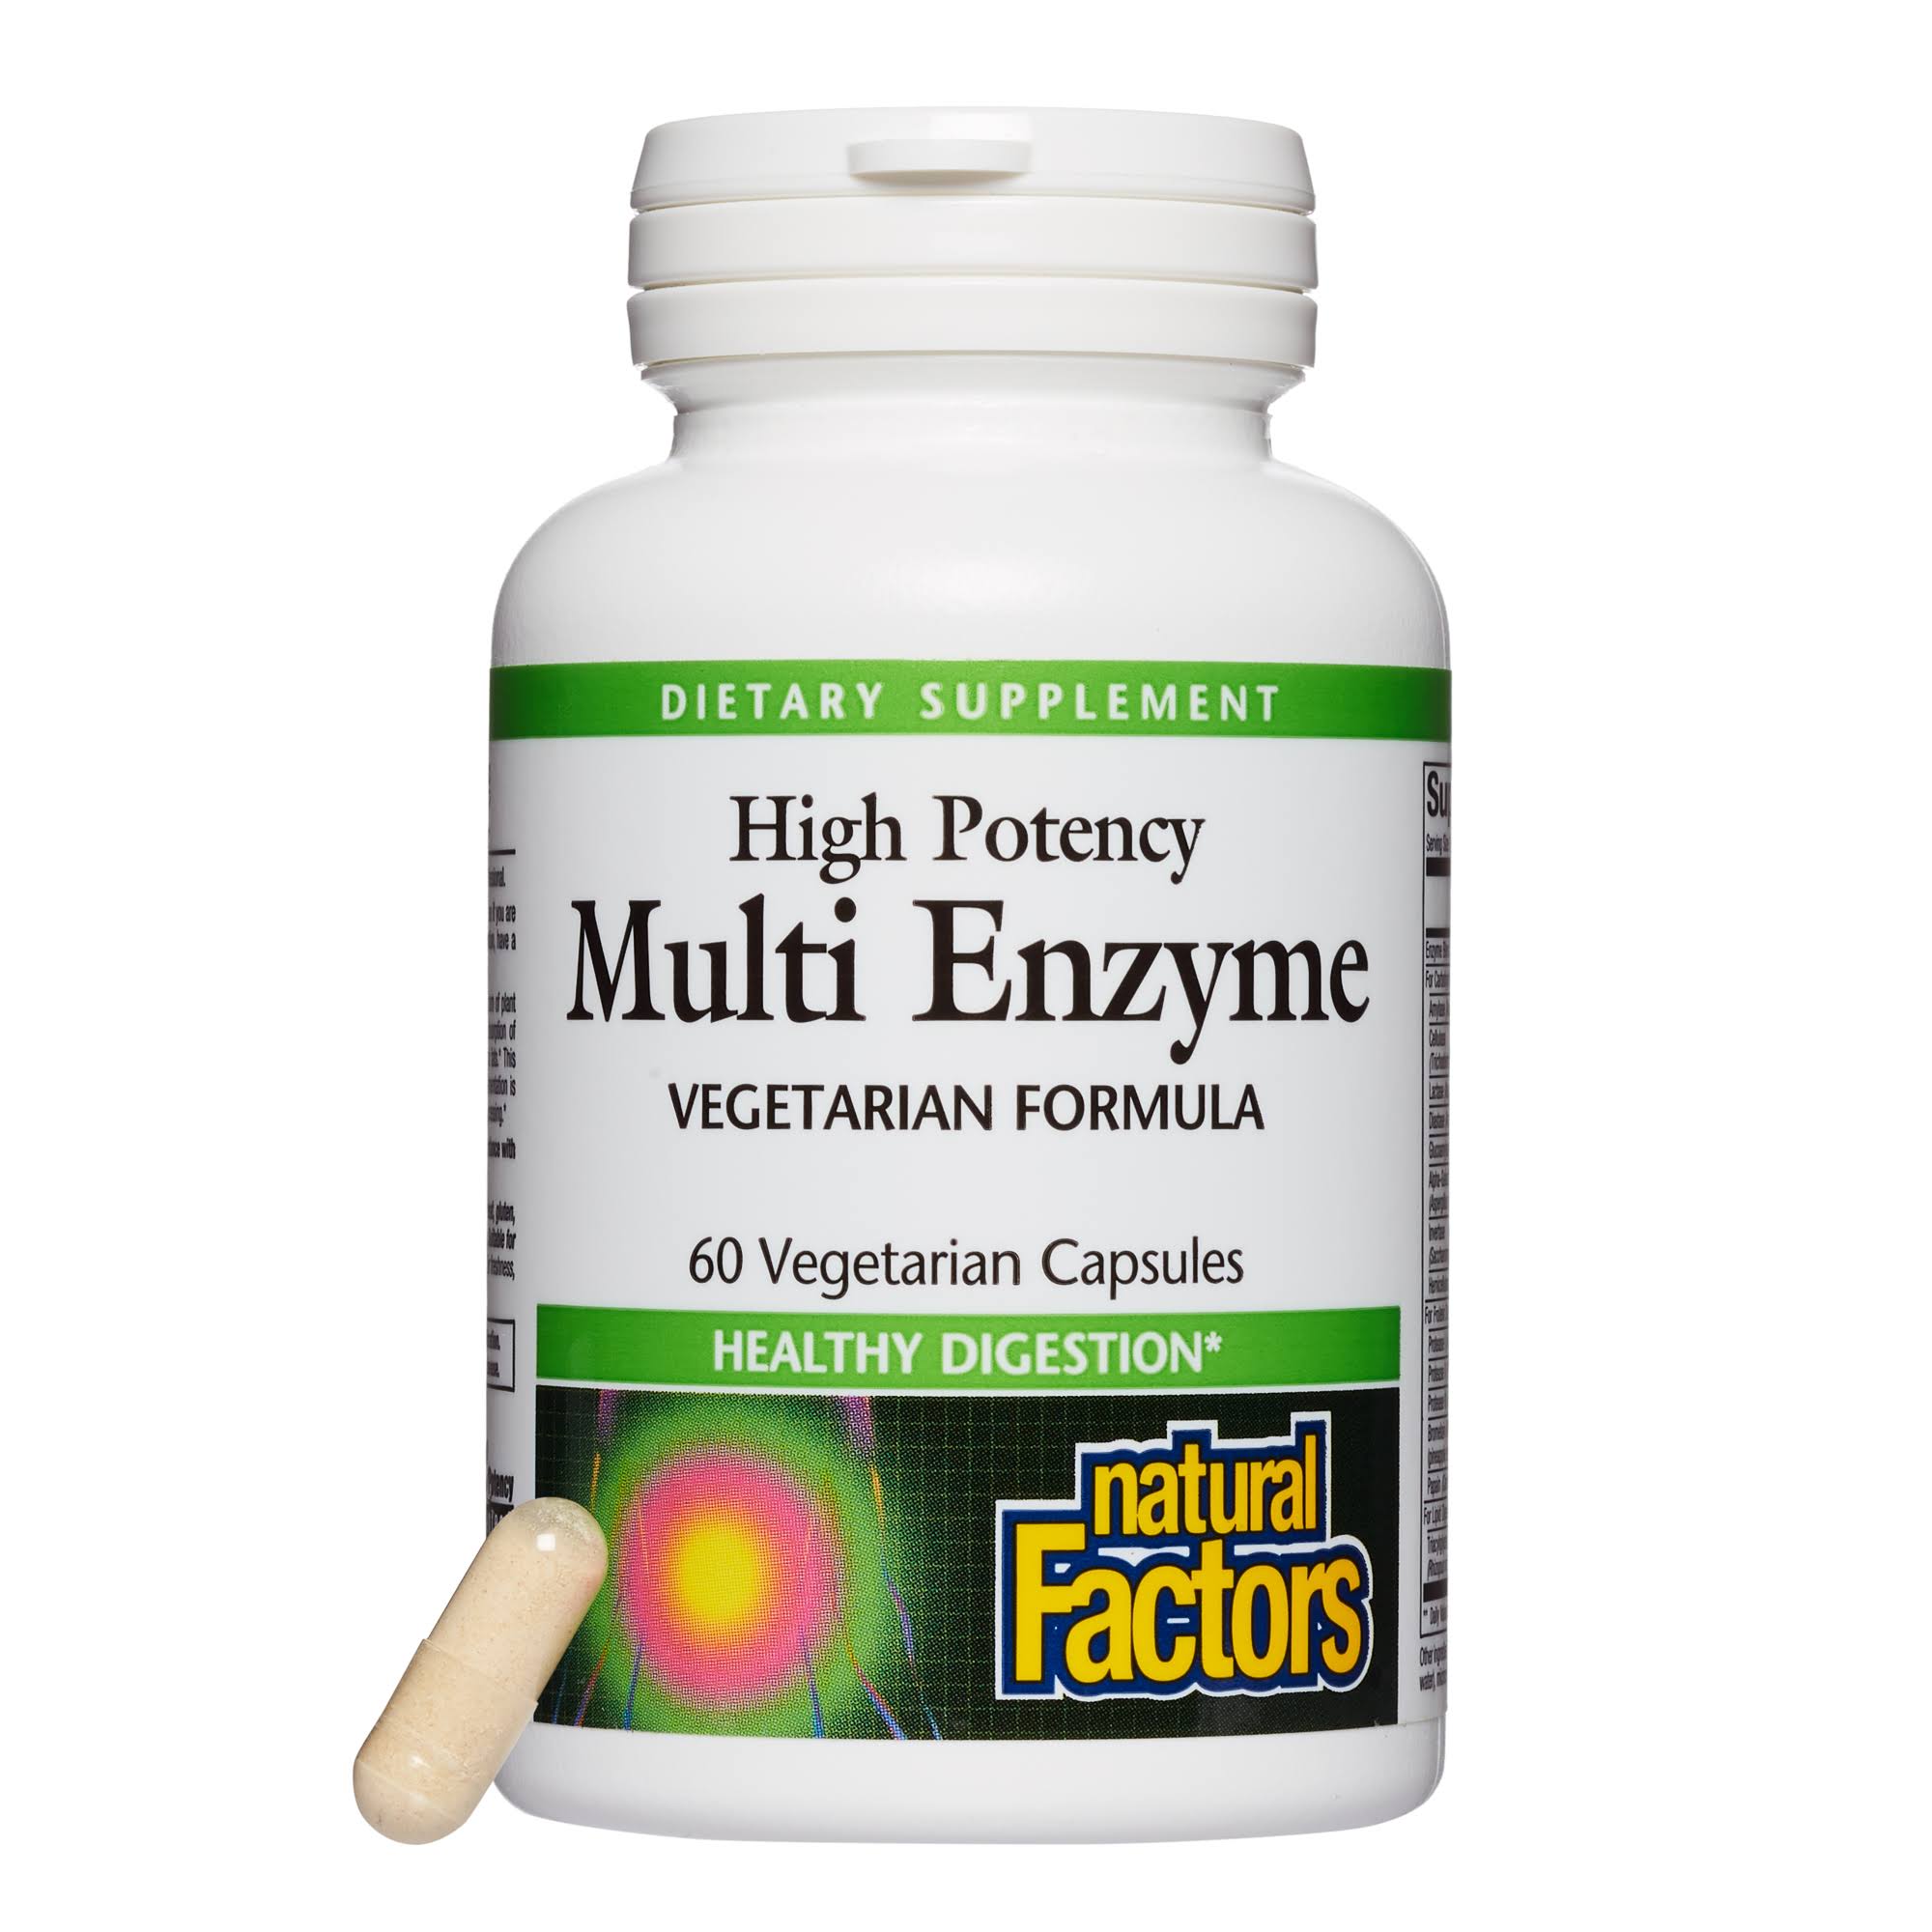 Natural Factors High Potency Multi Enzyme Dietary Supplement - 60 Capsules